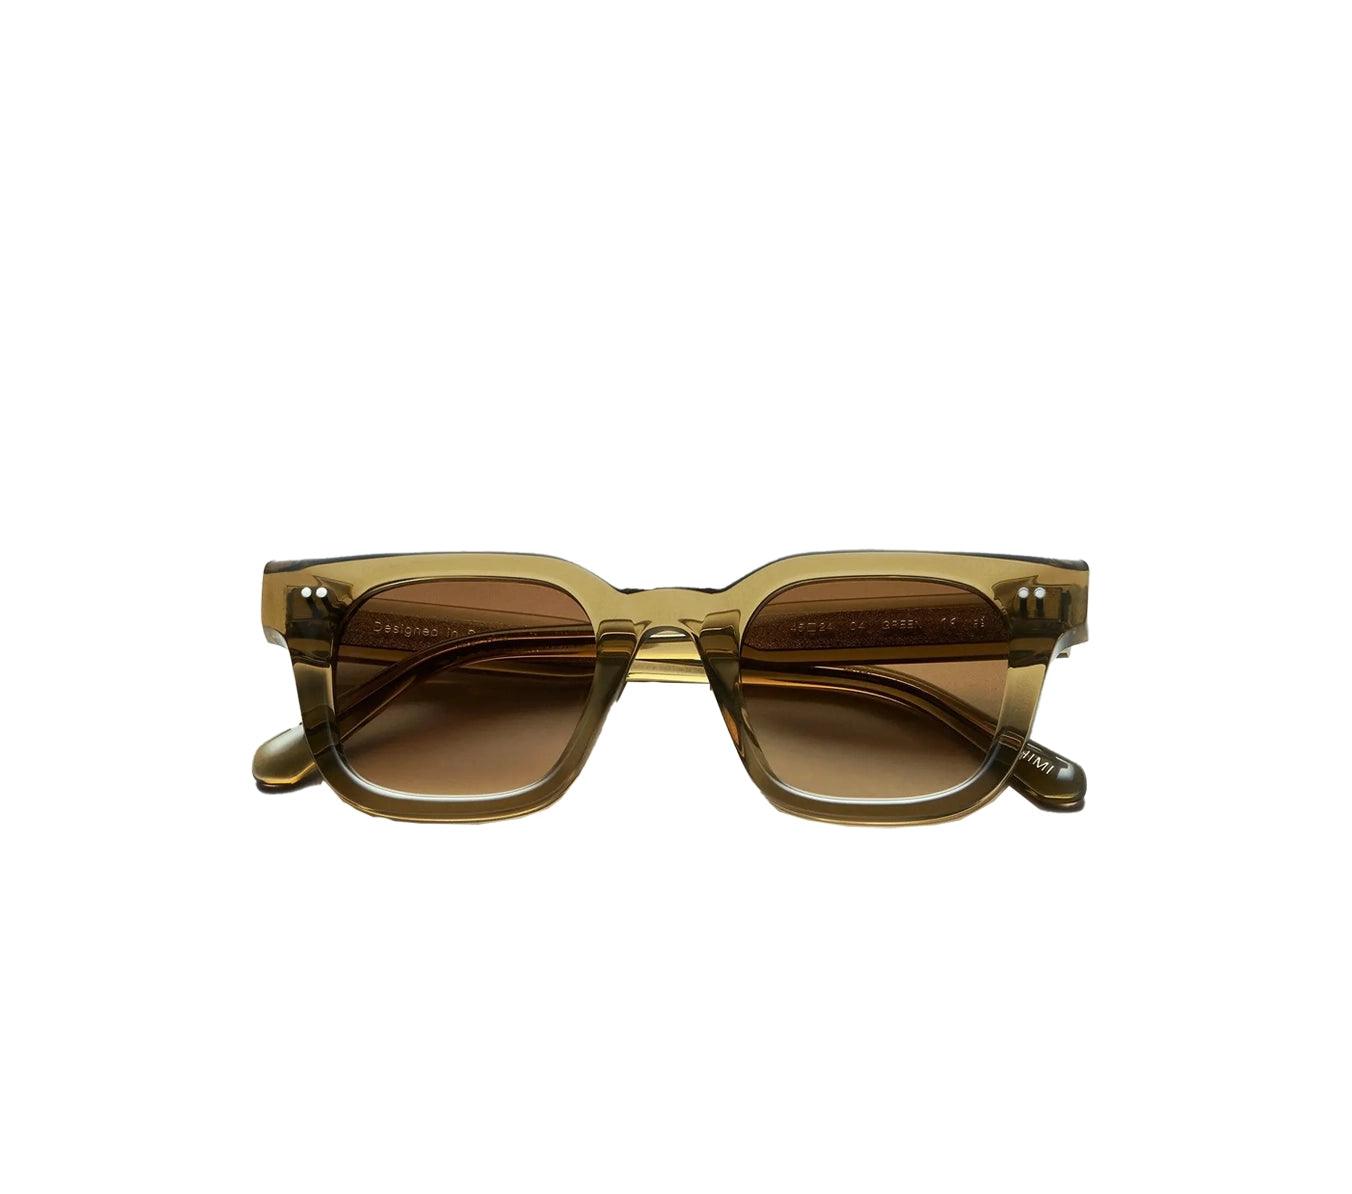 CHIMI 04 - Green - One size - Sunglasses